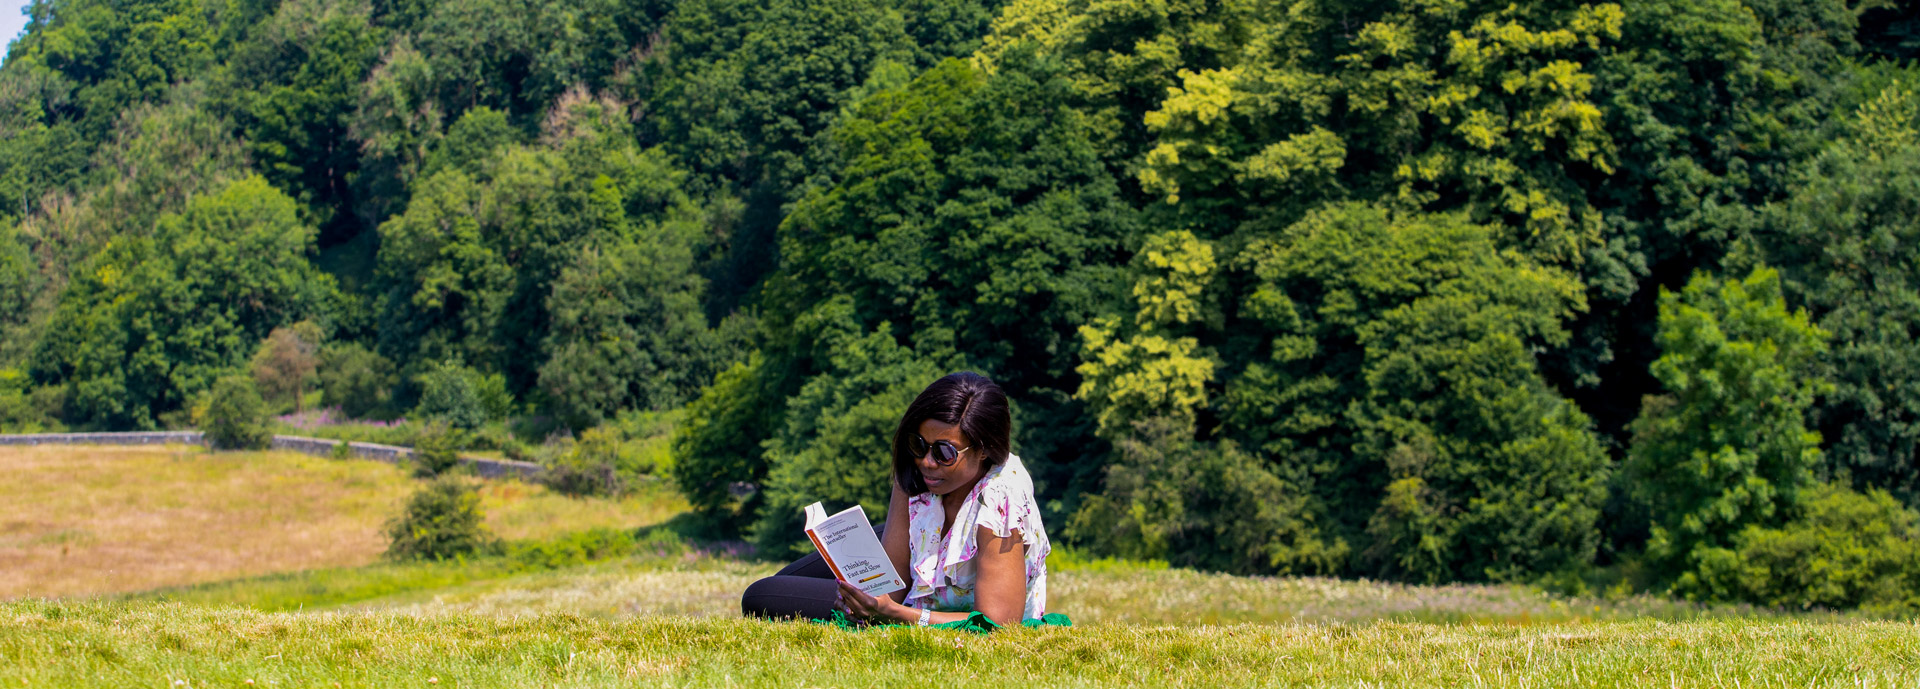 A student reading on a sunny day in Kings Knot, Stirling